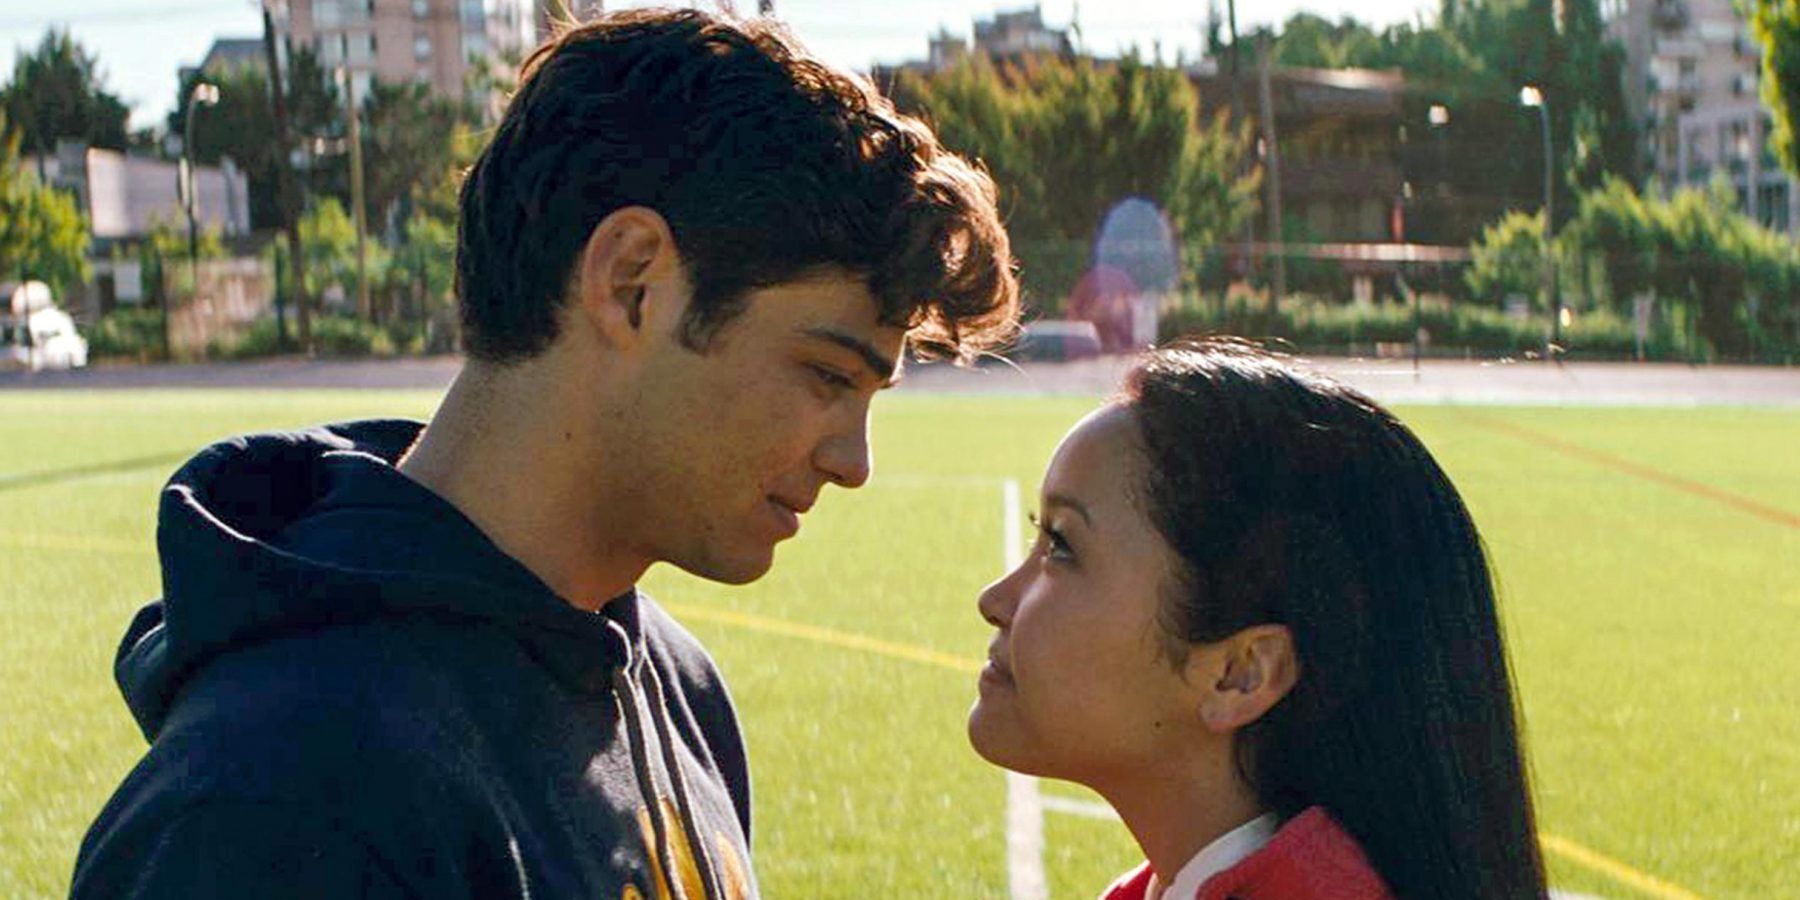 Noah Centineo And Lana Condor In To All The Boys I've Loved Before.